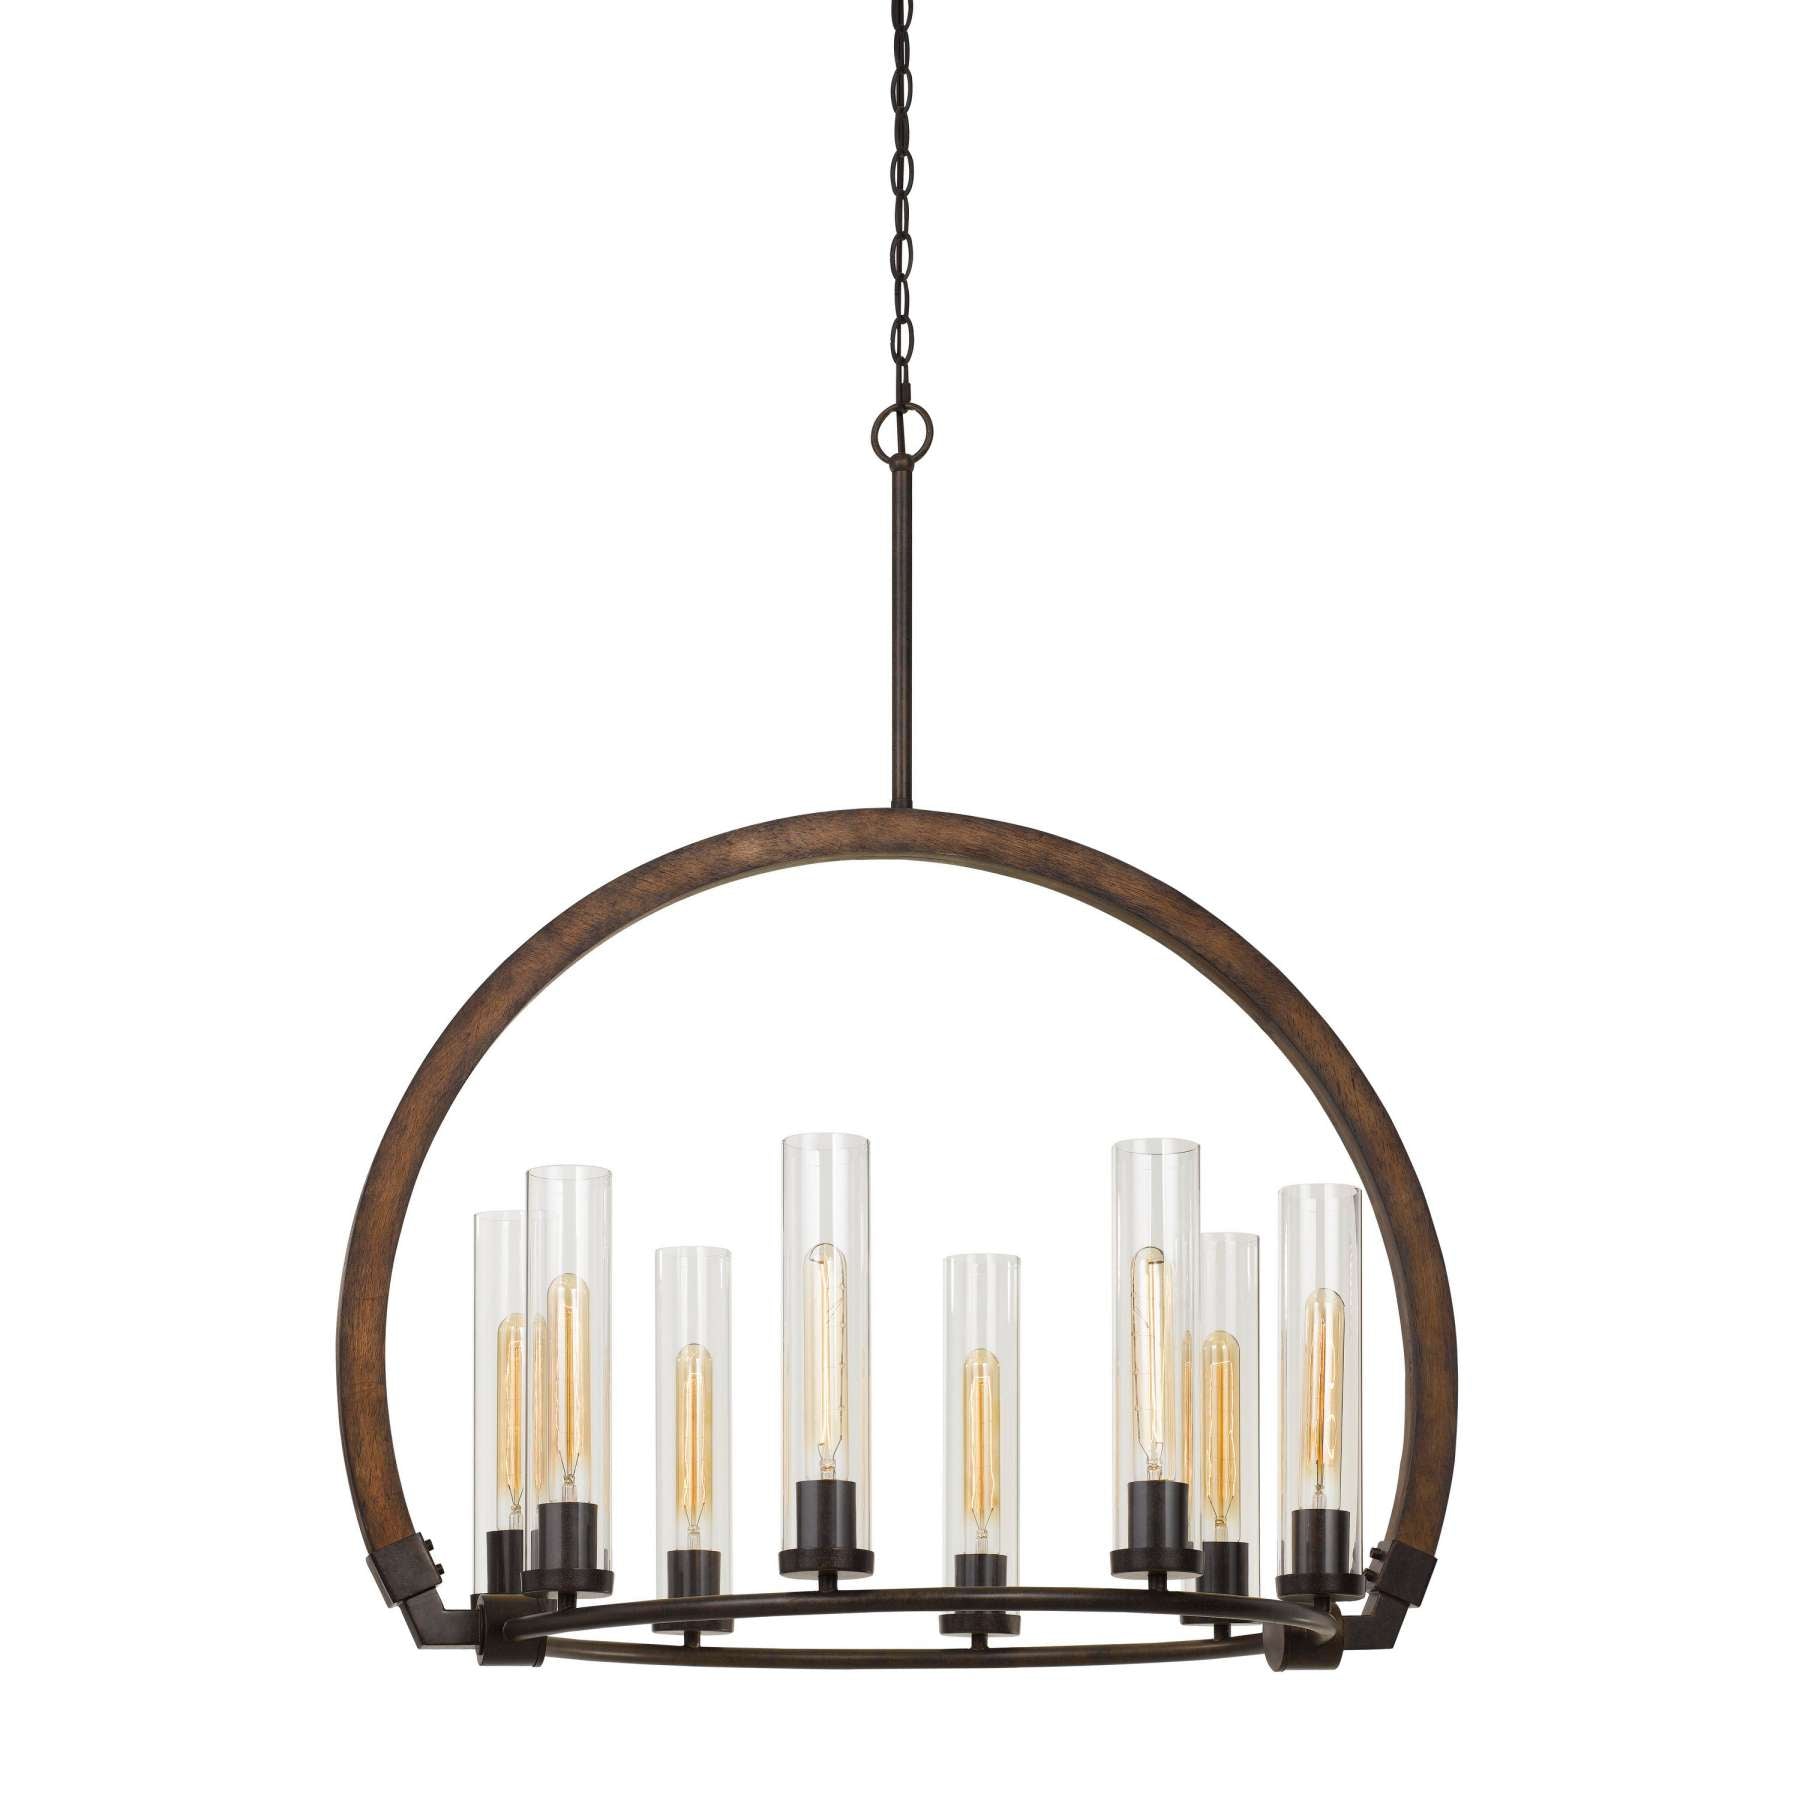 8 Bulb Chandelier With Arched Wooden And Metal Frame, Brown And Bronze By Benzara